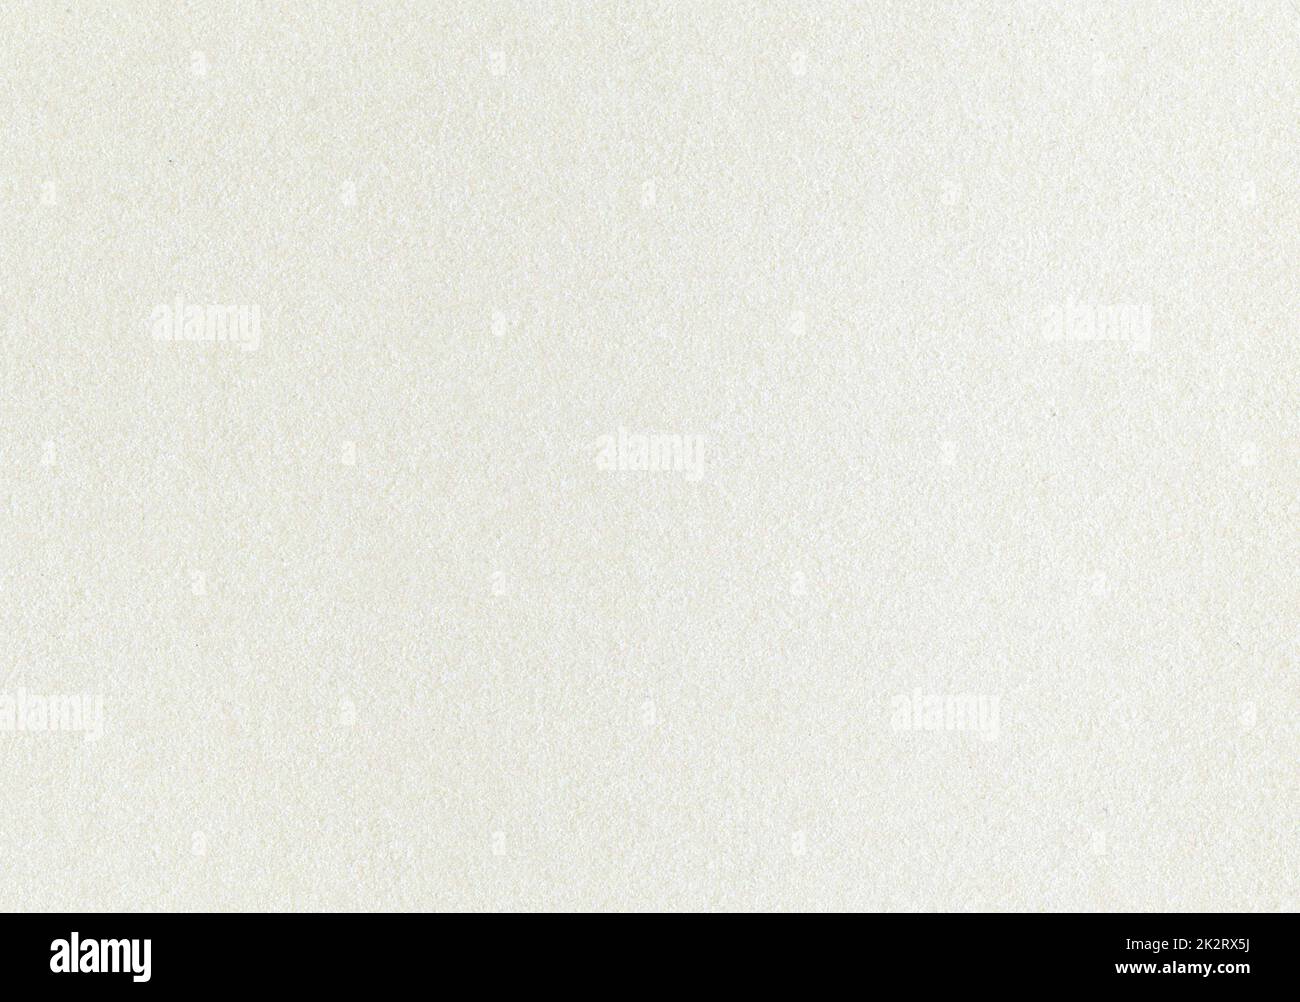 Highly detailed extreme close up large image scan of an smooth, shiny fine fiber grain paper texture background. Glossy, metallic shine effect on a paper for presentation, wallpaper and mockup design Stock Photo